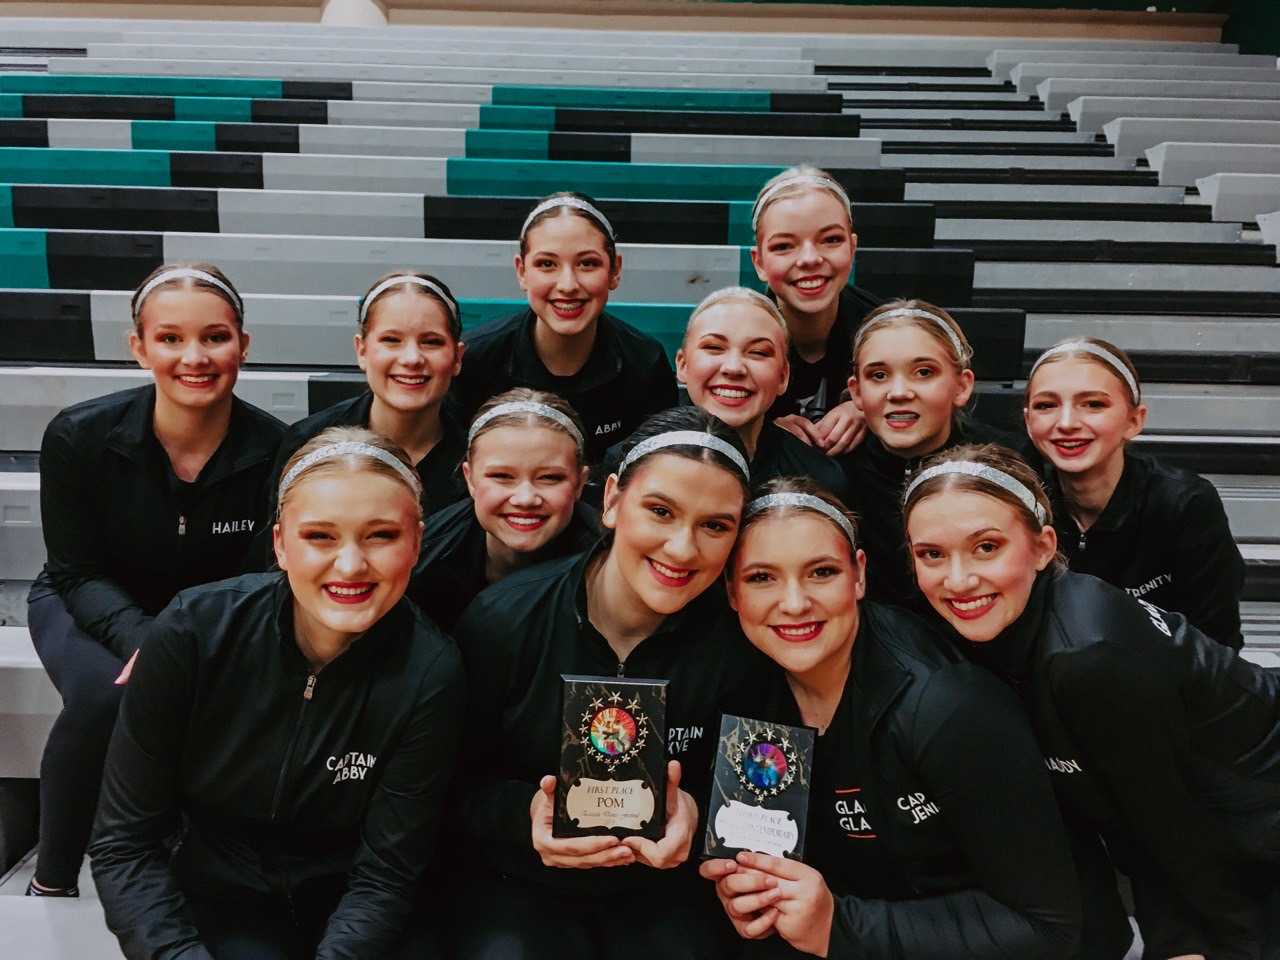 The Gladstone Gladettes finished first in Pom, second in Small Jazz, and thir in Small Contemporary at the Reynolds Competition.